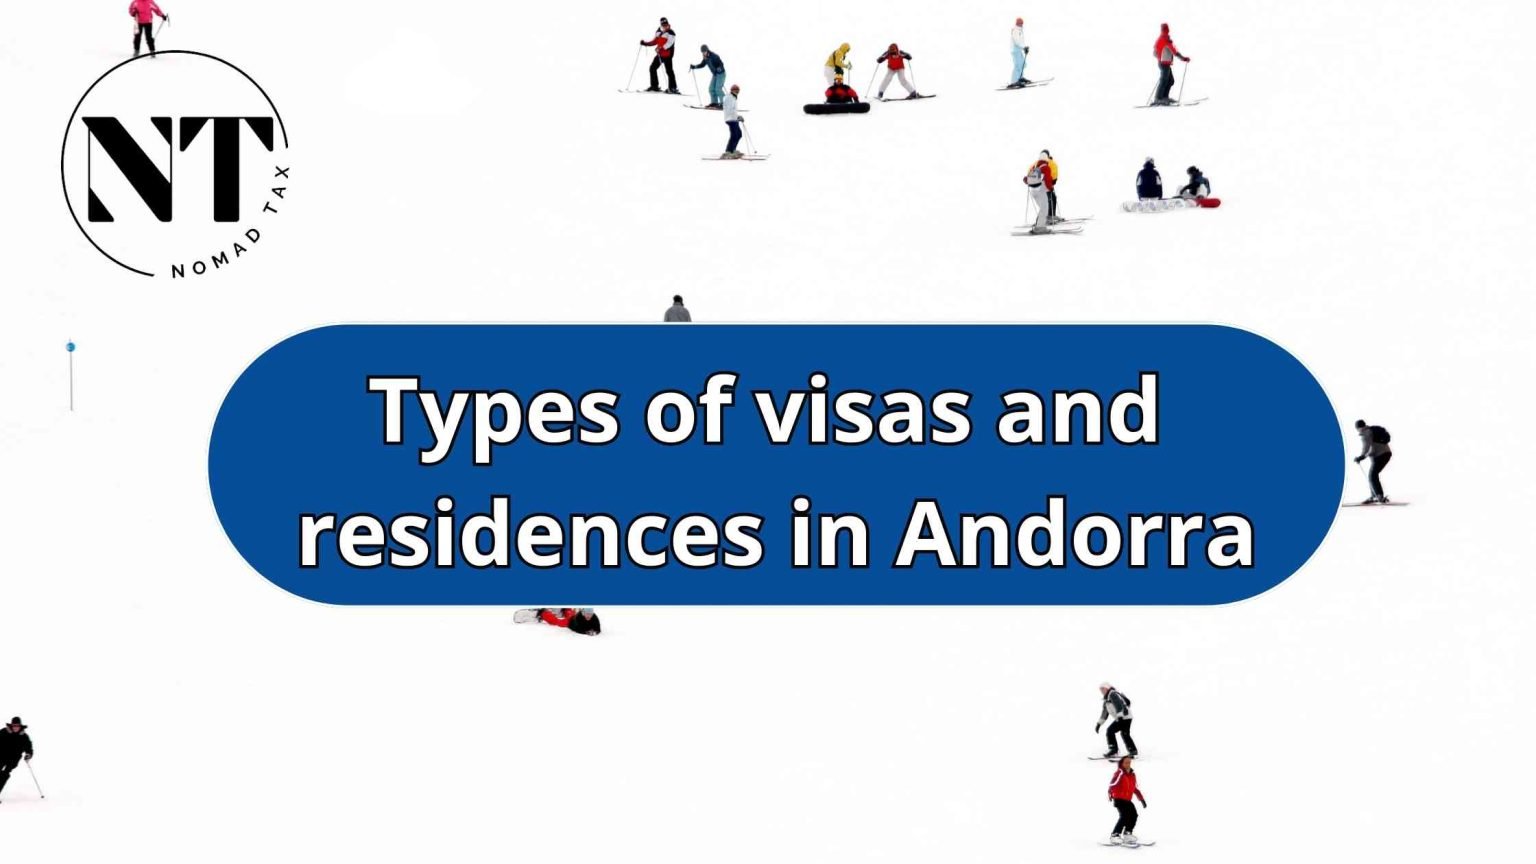 What is a non-profit (passive) residence in Andorra?